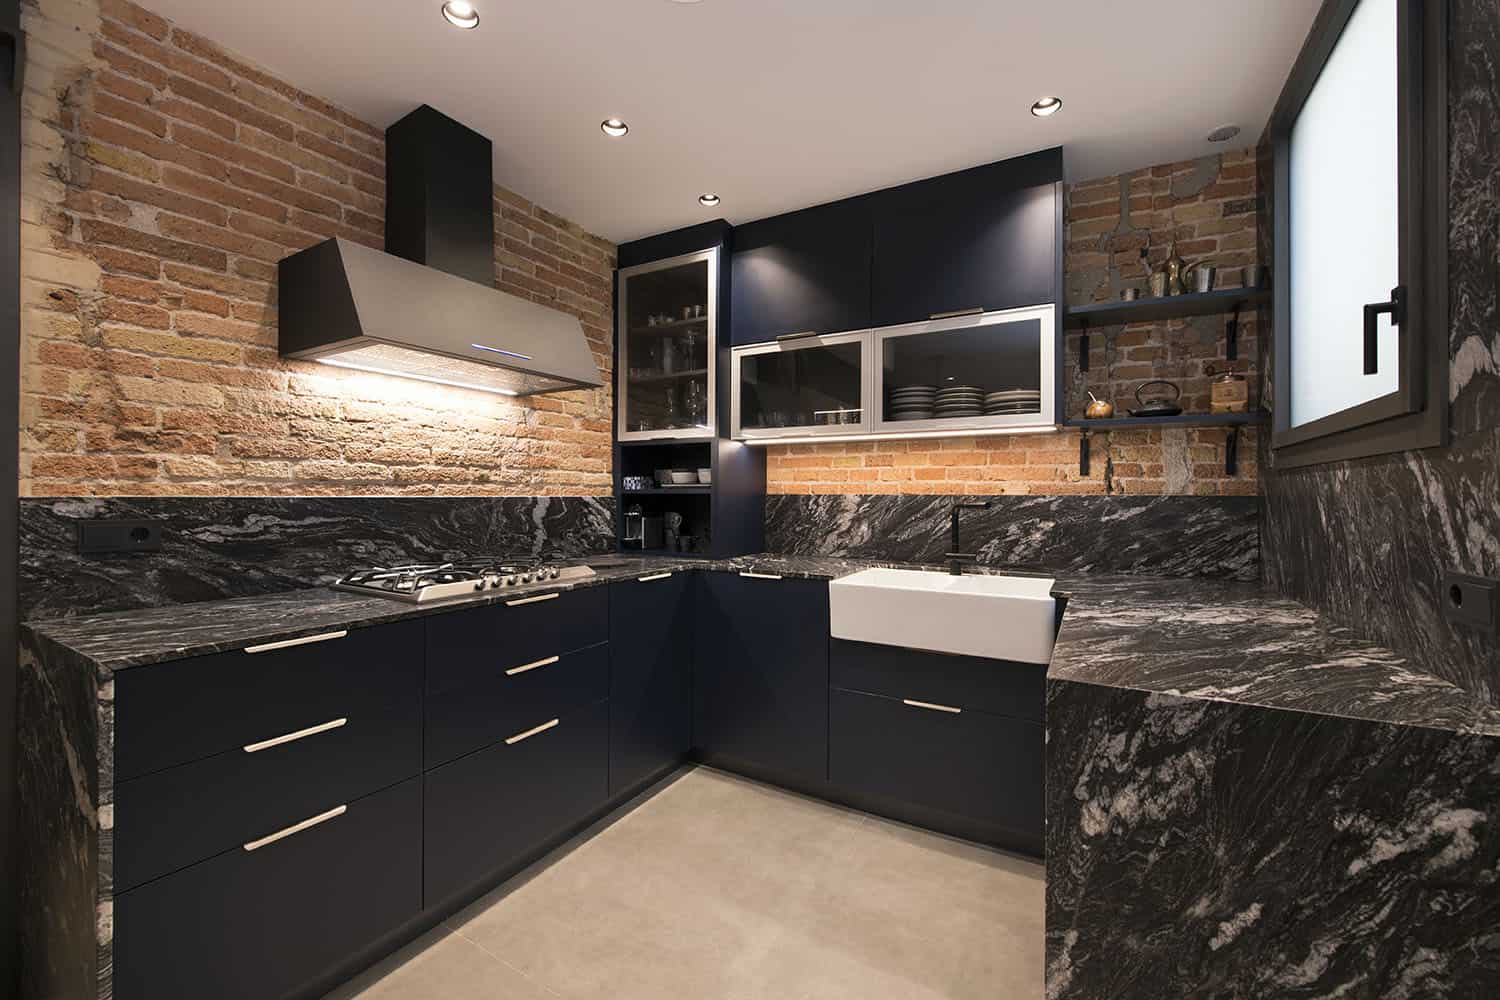 The kitchen is all industrial, with black cabinetry, black marble countertops and backsplashes, red brick walls